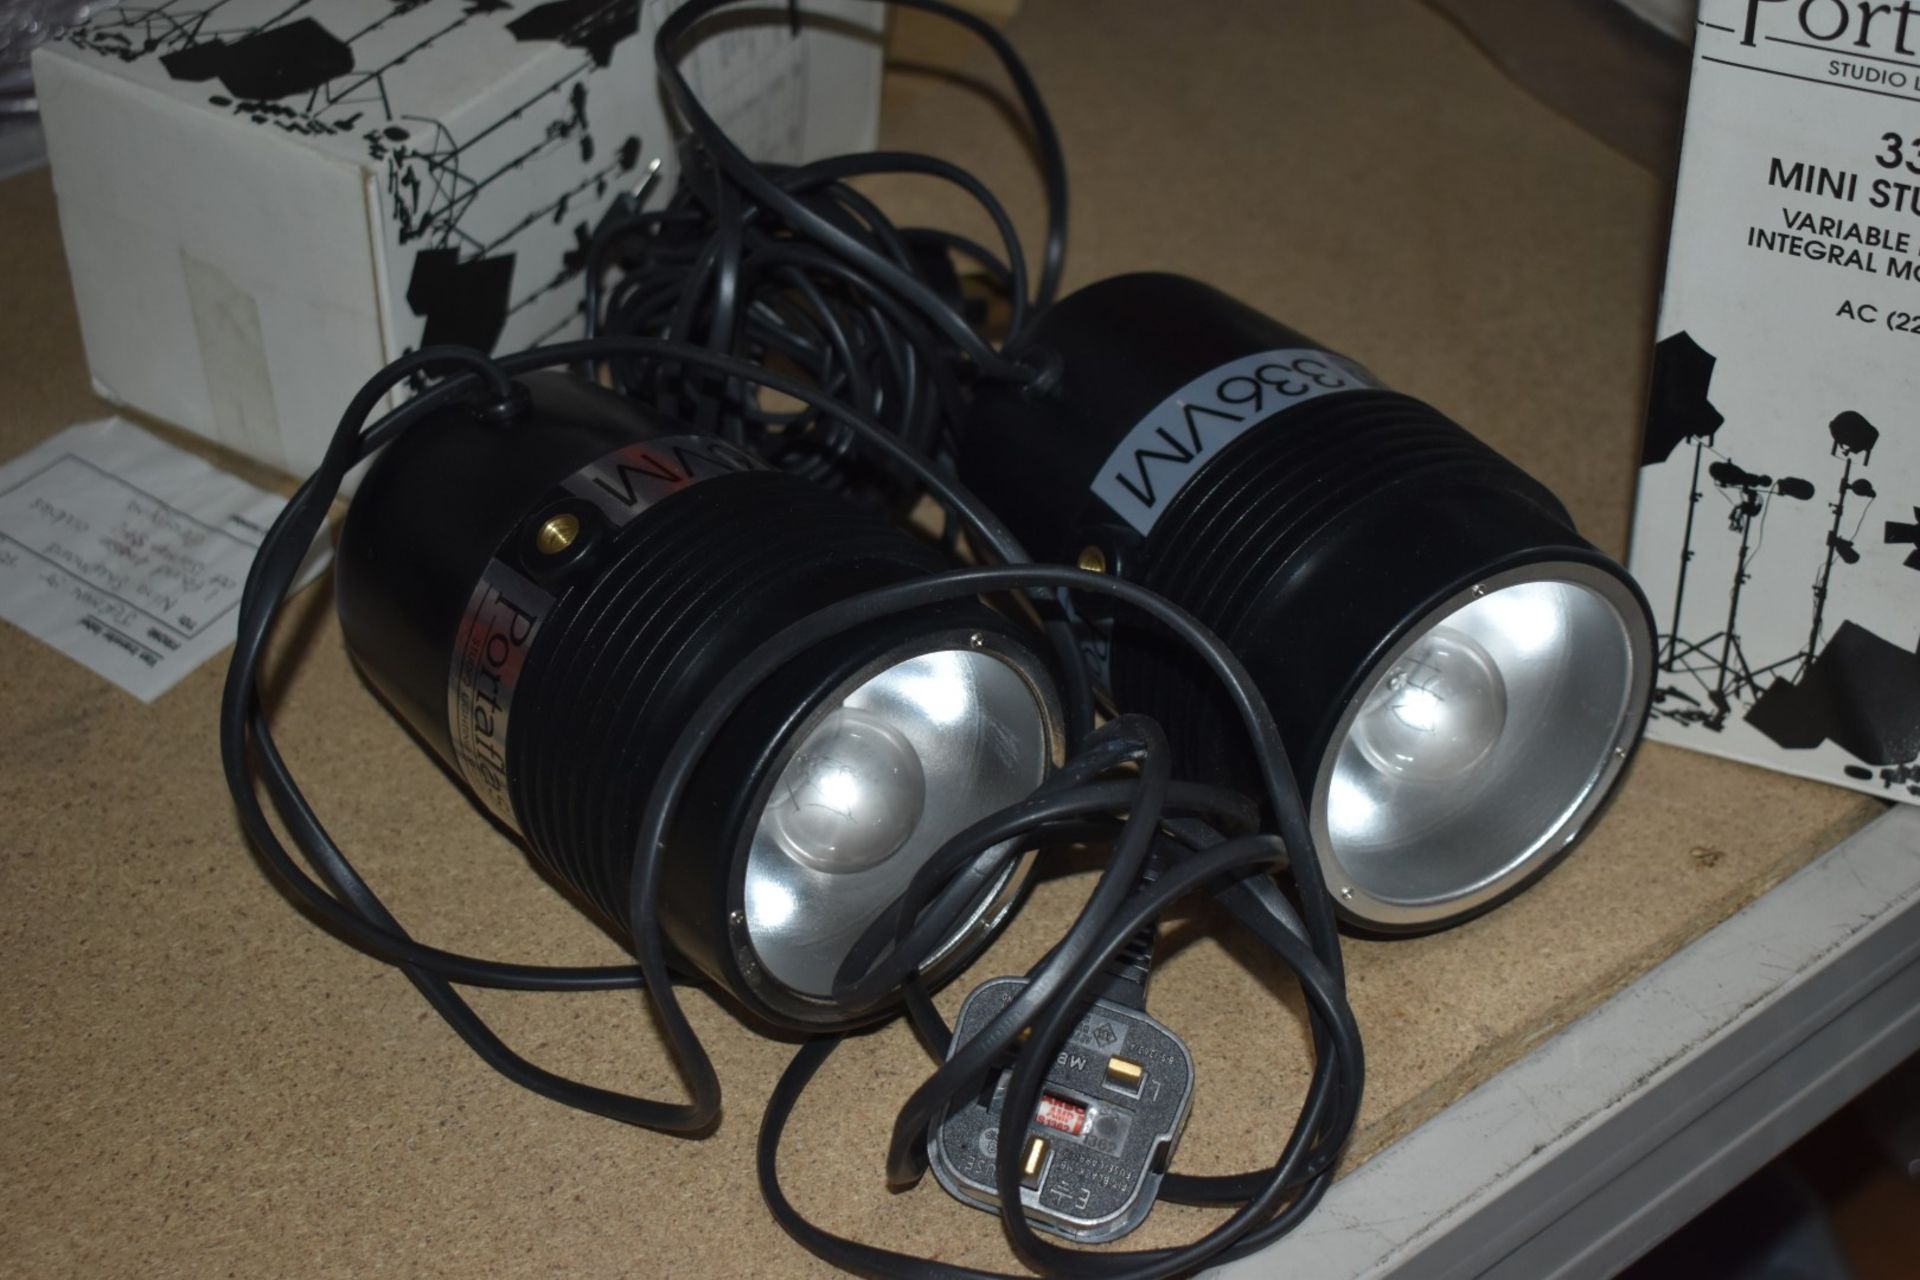 2 x Portaflash 336VM Mini Studio Flash Lights For Photography - Boxed in Good Condition - Ref WHC101 - Image 2 of 3